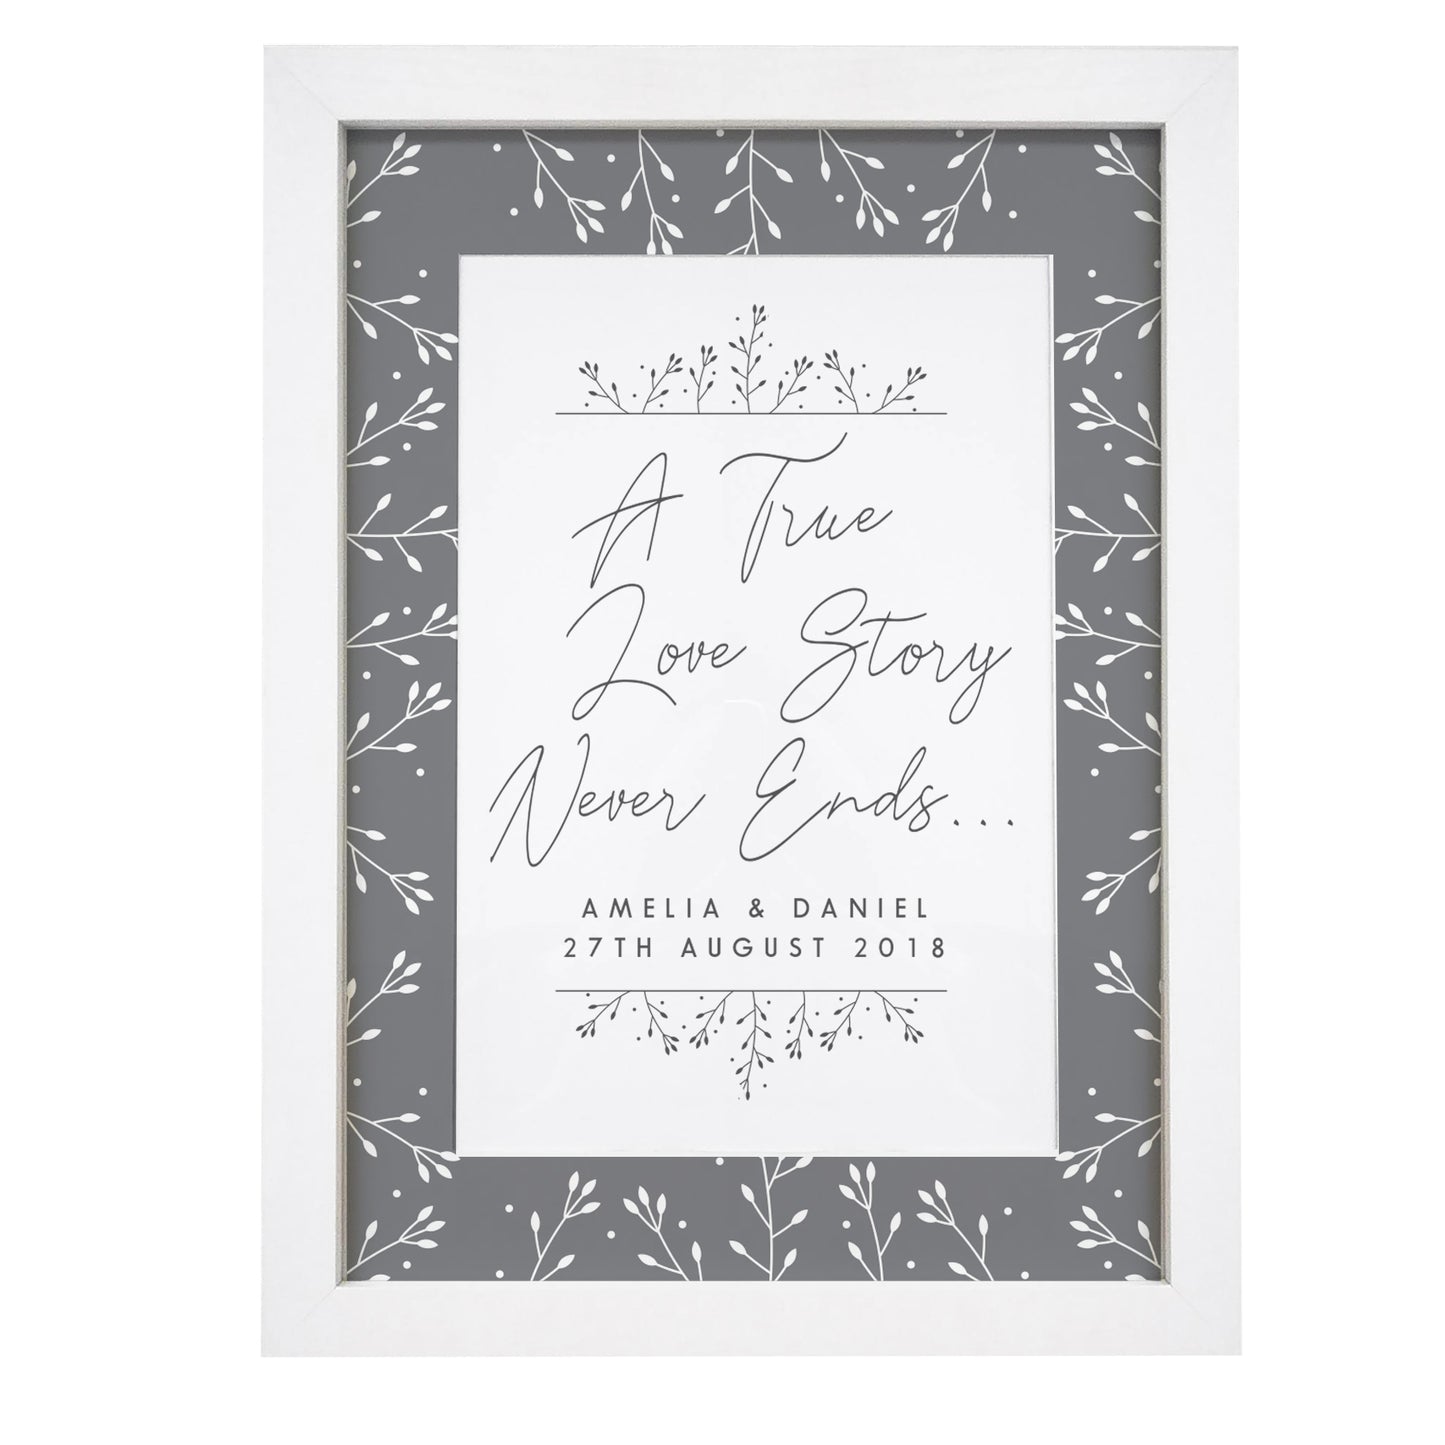 Personalised True Love Story A4 White Framed Print